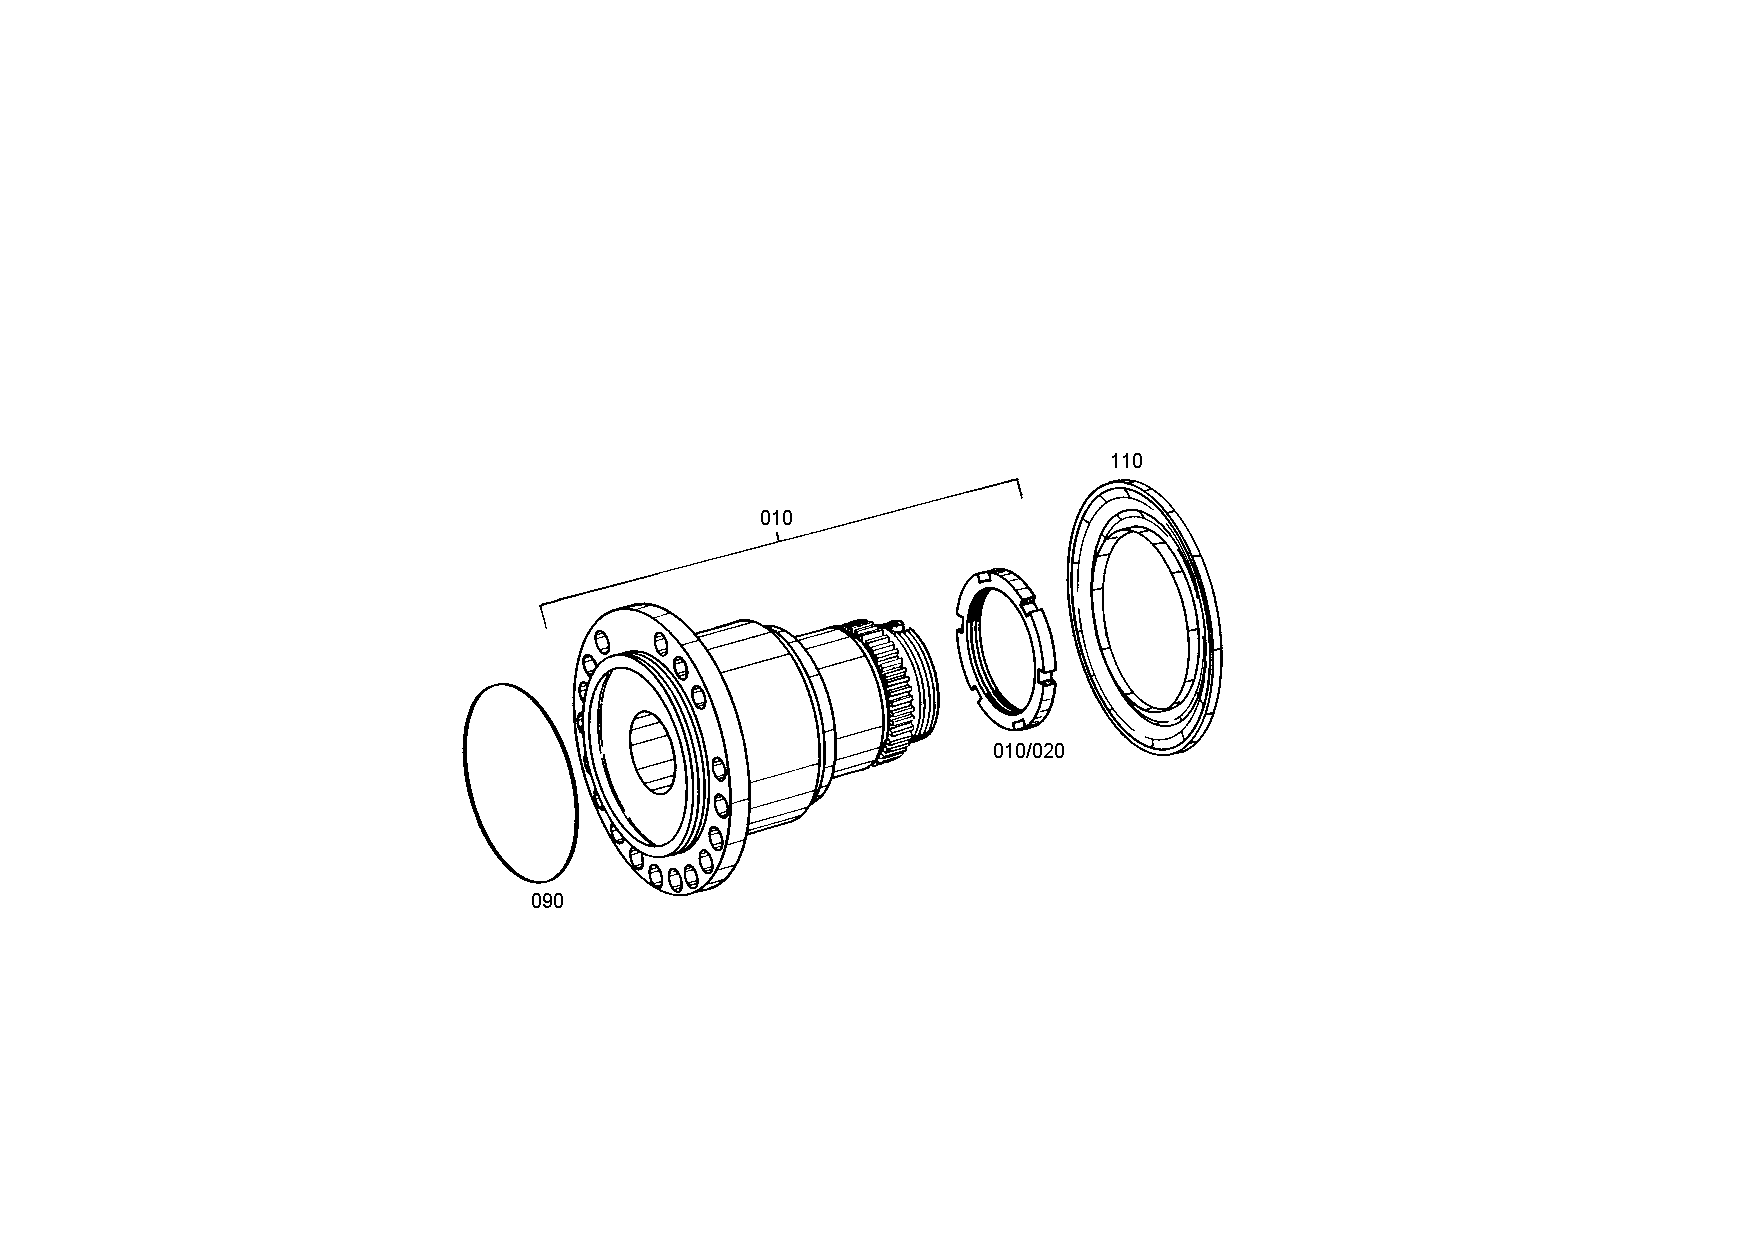 drawing for CATERPILLAR INC. 006137 - SUPPORT PLATE (figure 1)